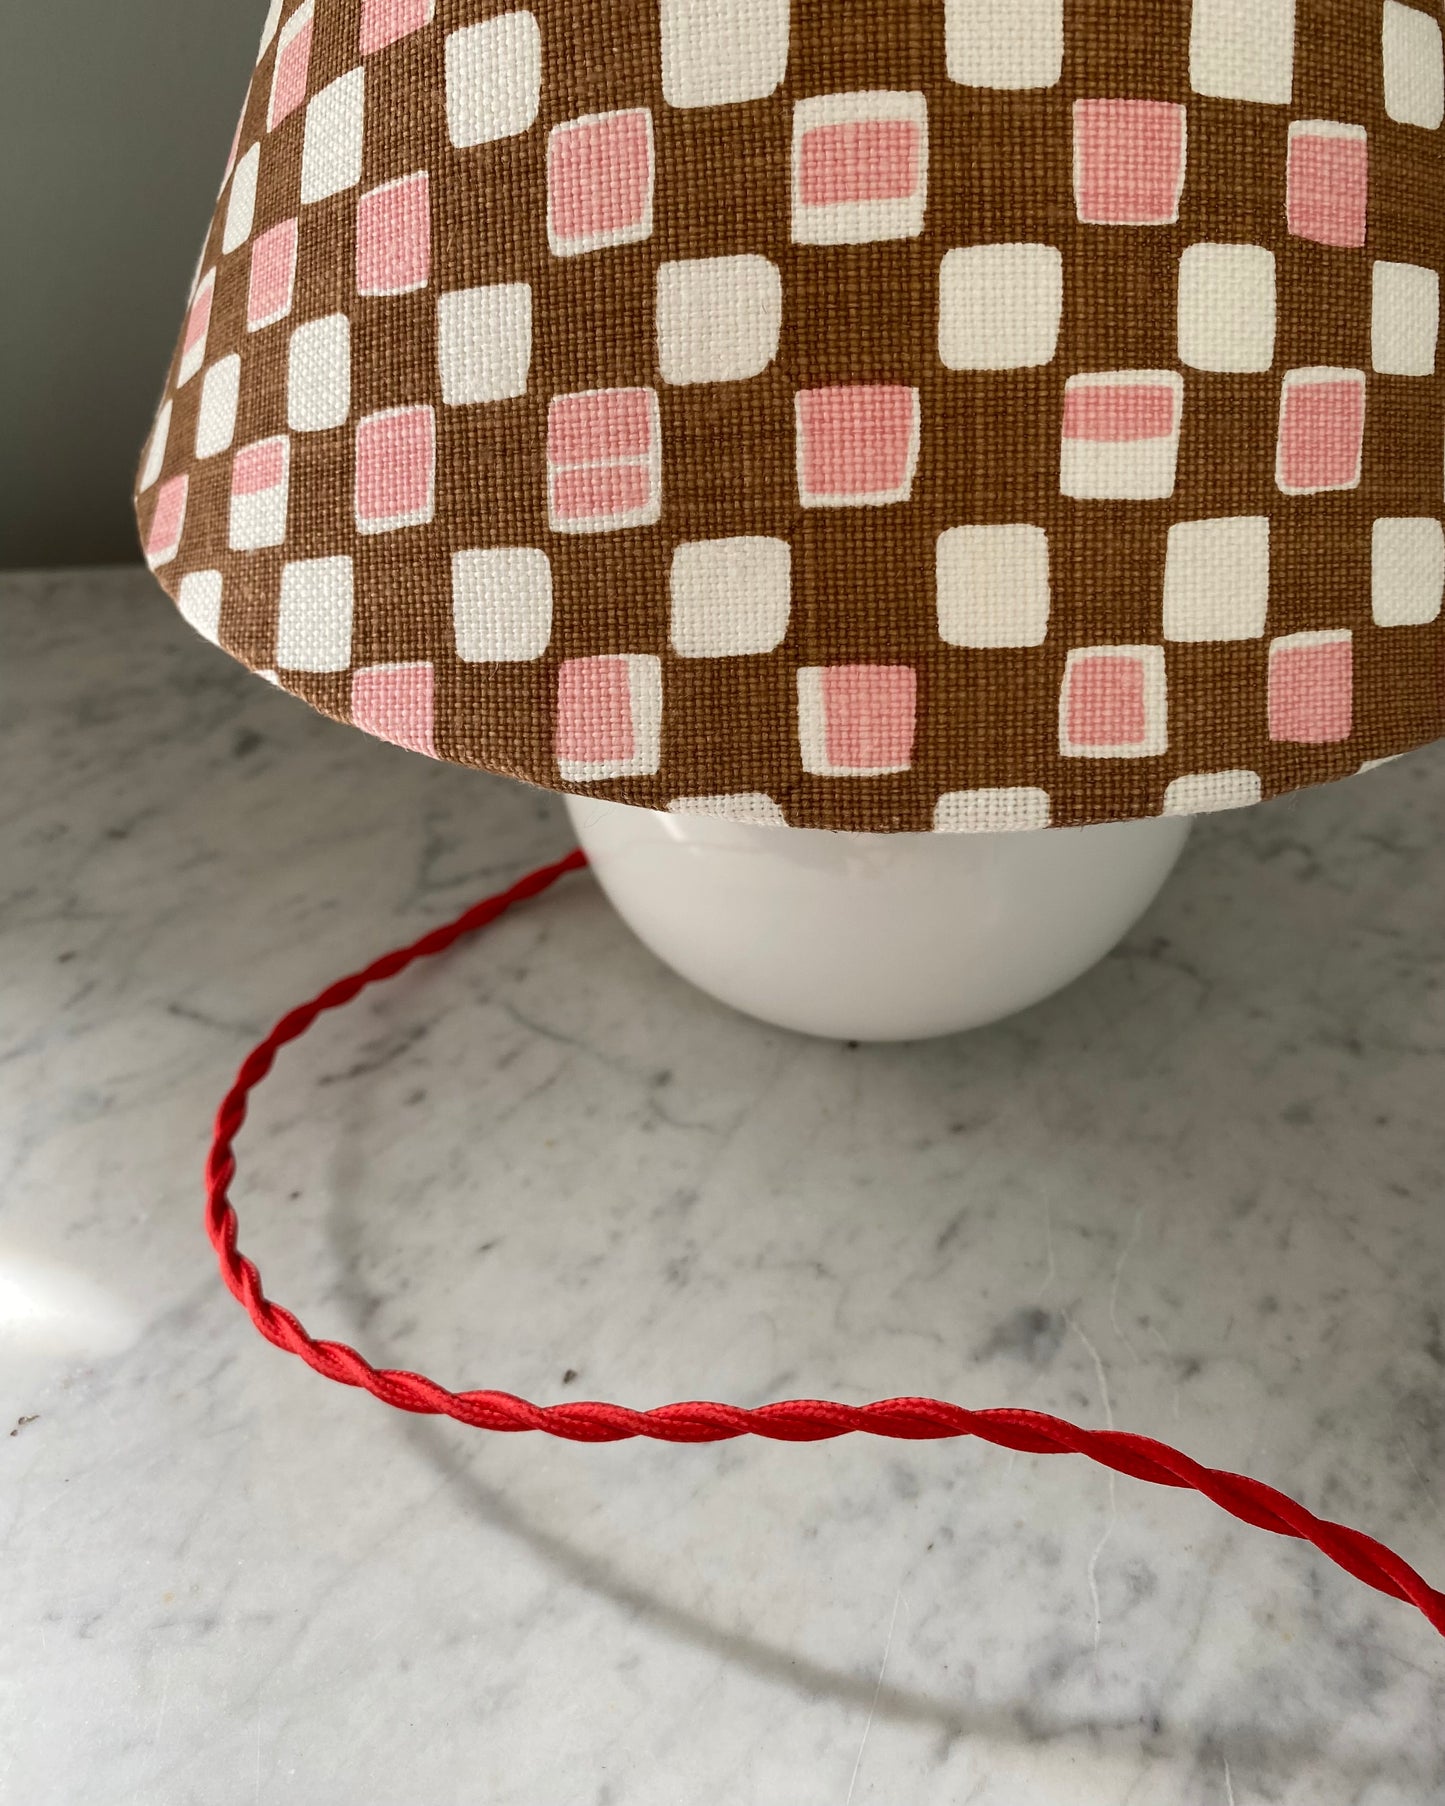 White table lamp with shade from Cathy Nordström